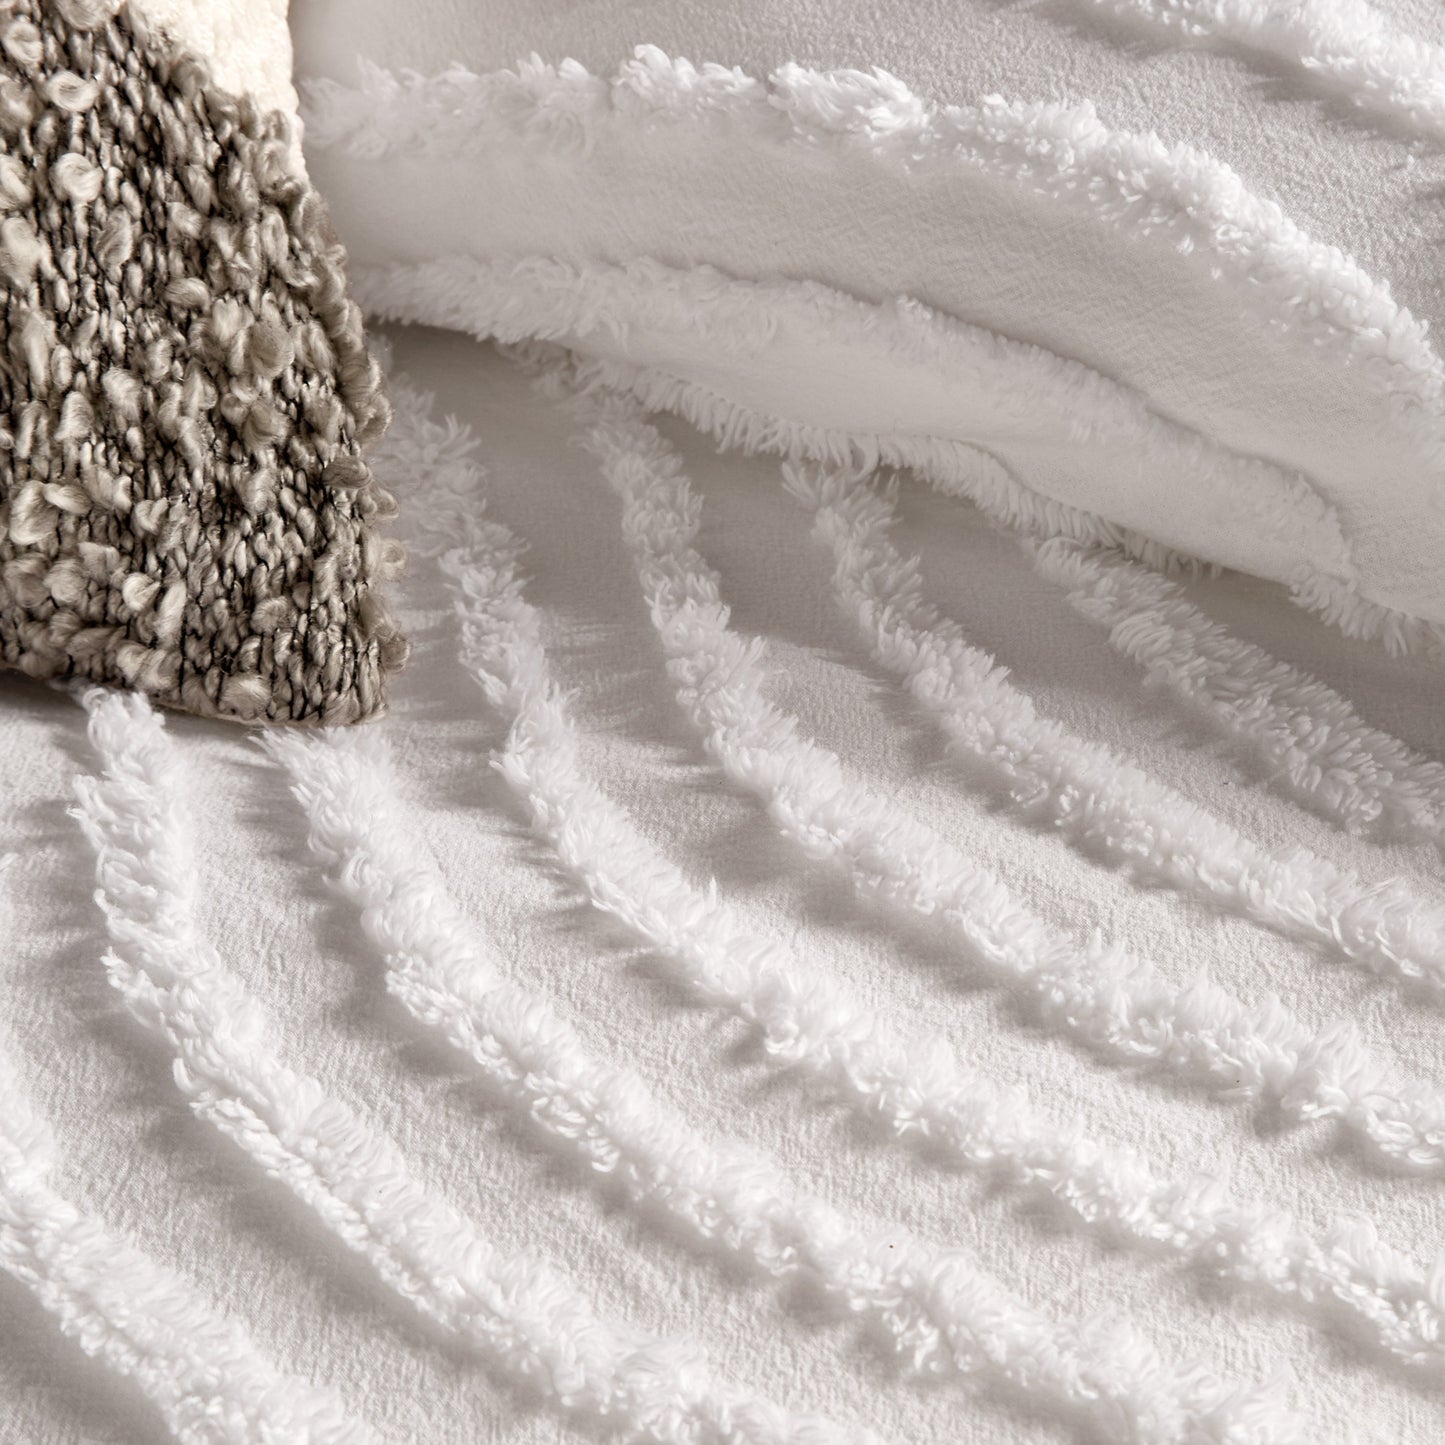 Murmur Chenille Wave Comforter Bedding Collection